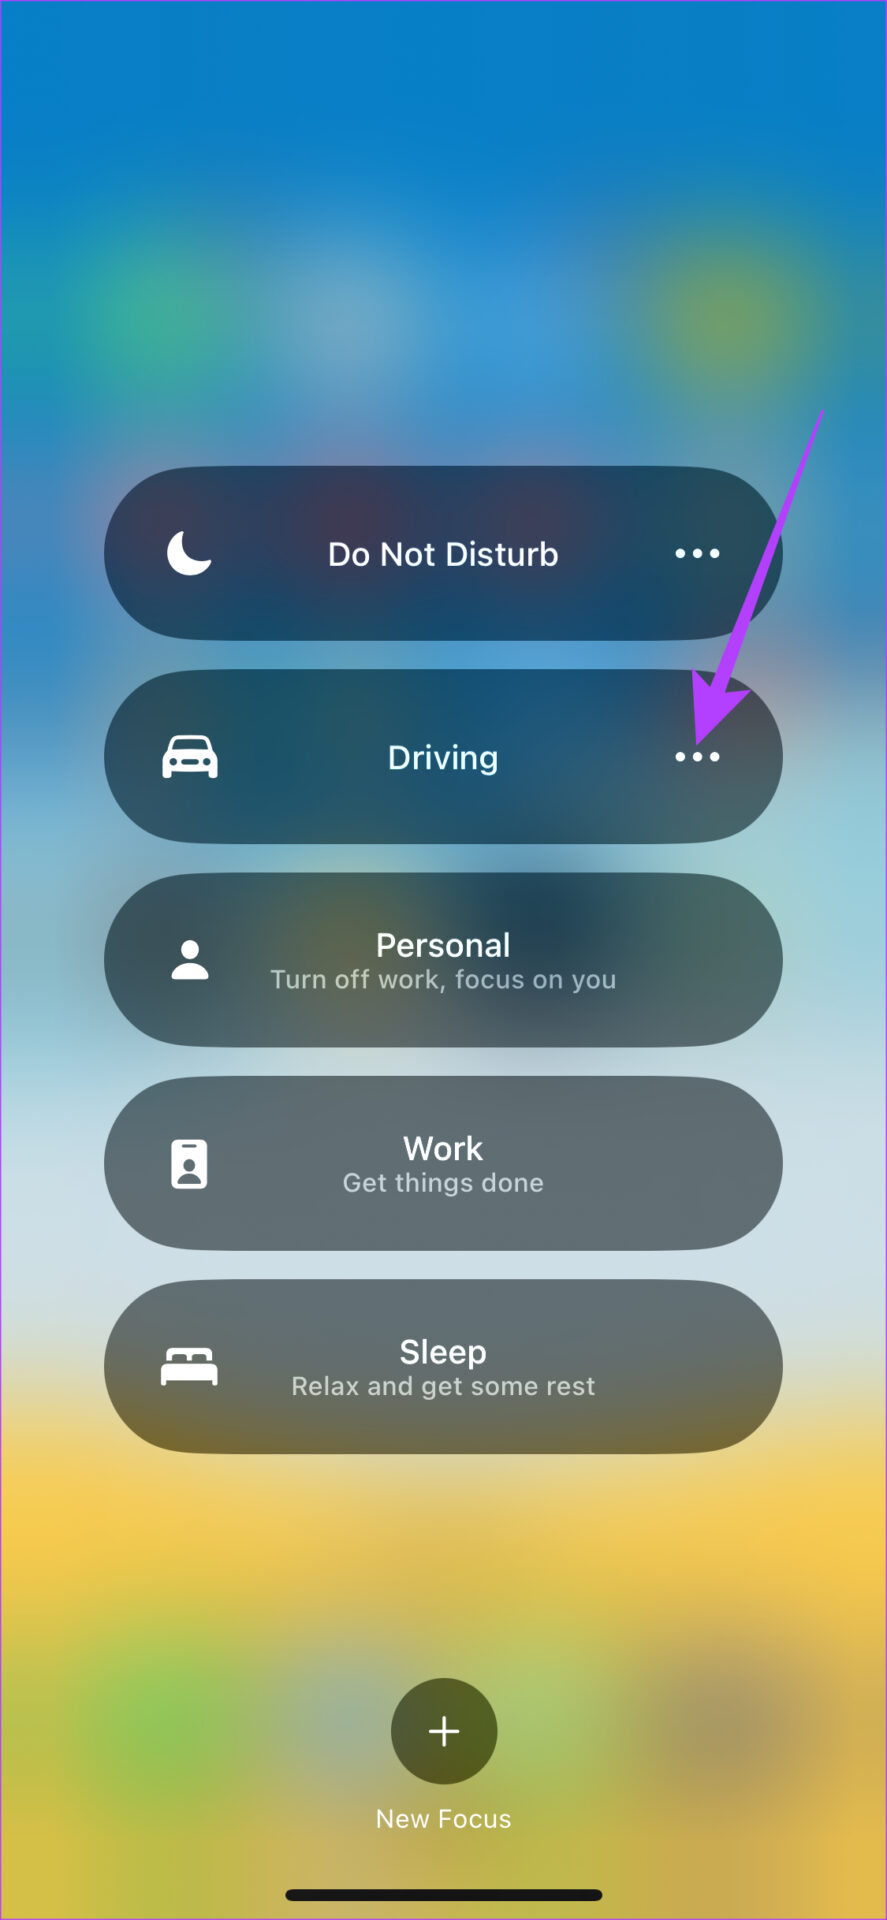 Go to the driving mode settings.